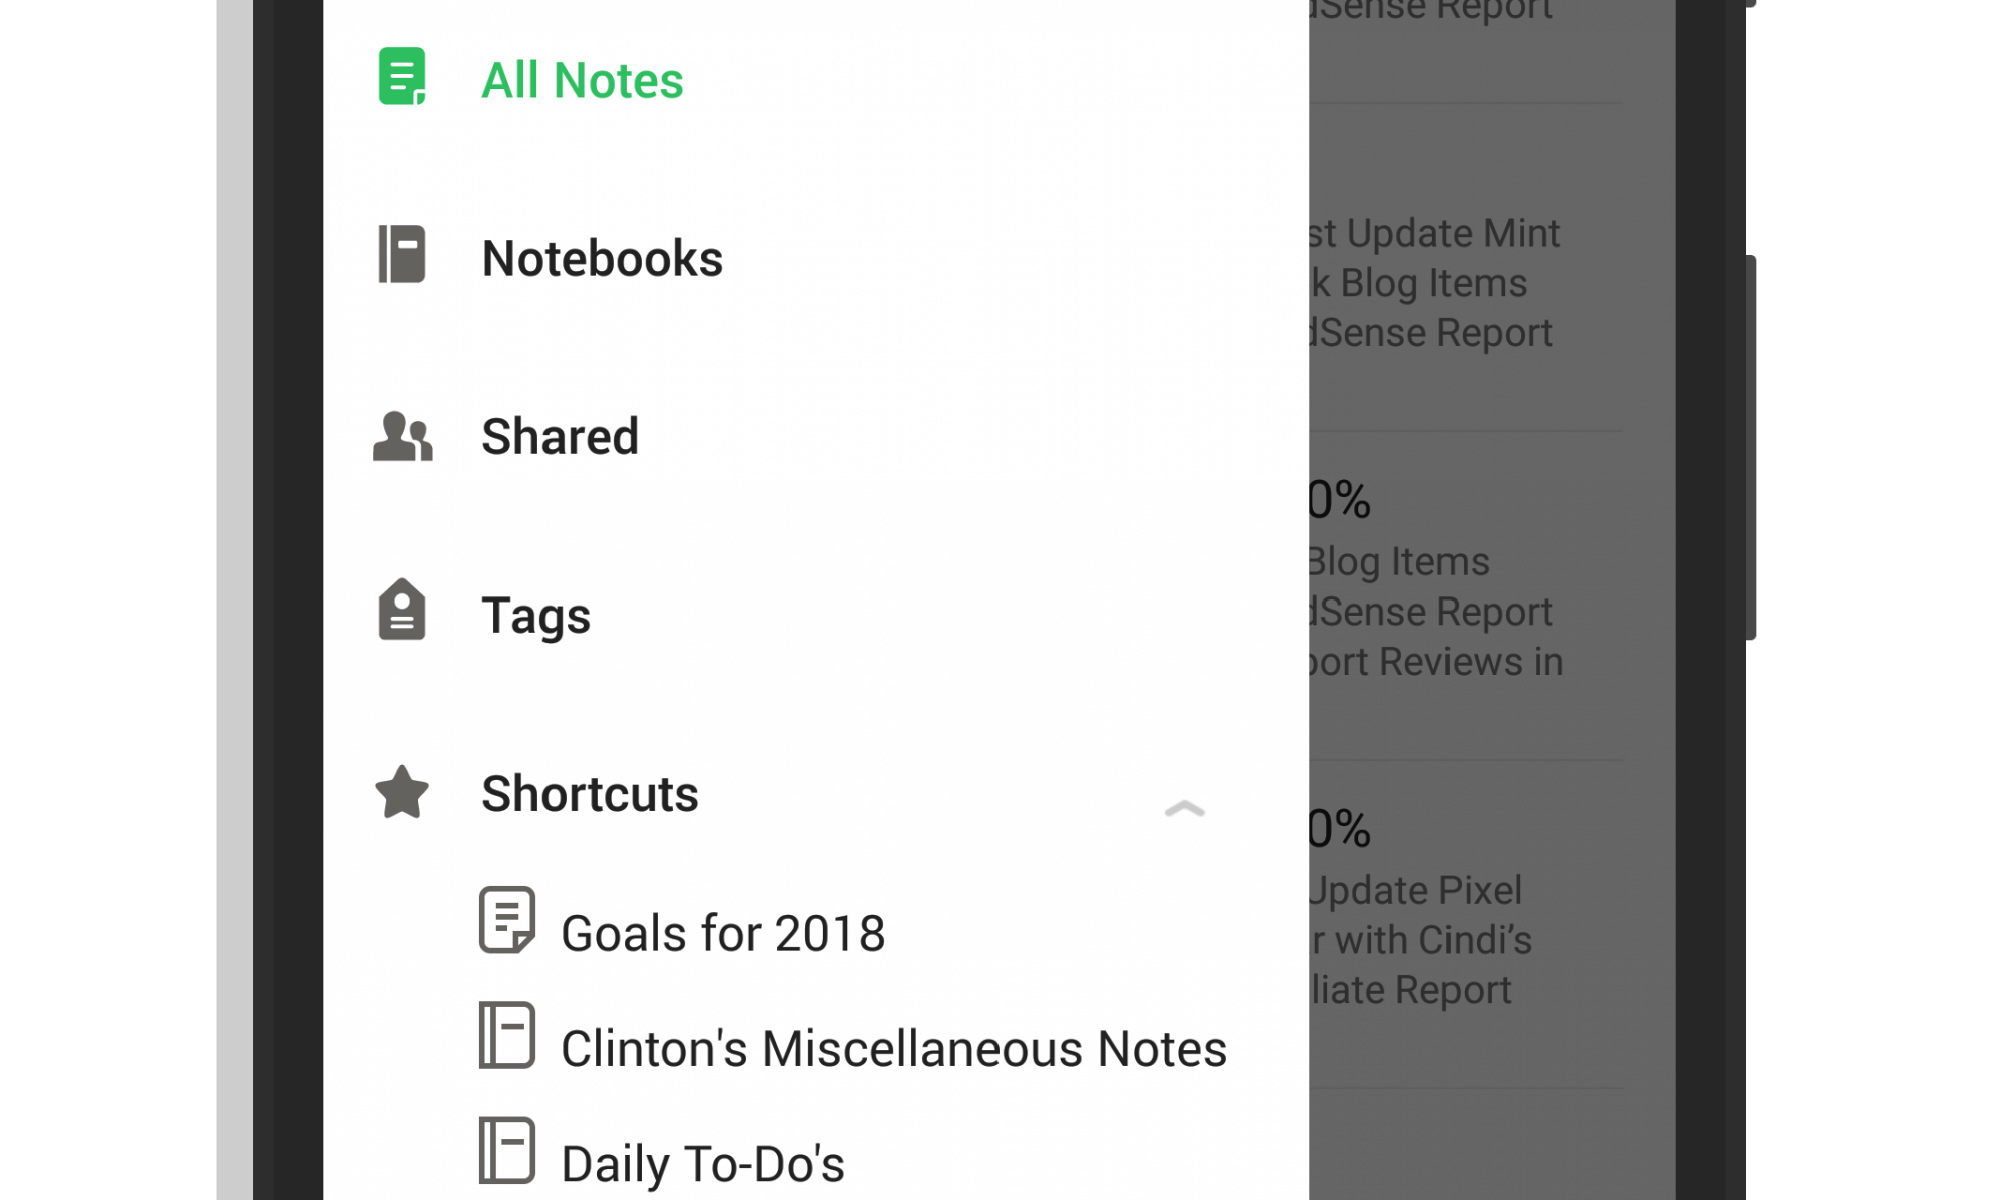 download the new for android EverNote 10.58.8.4175